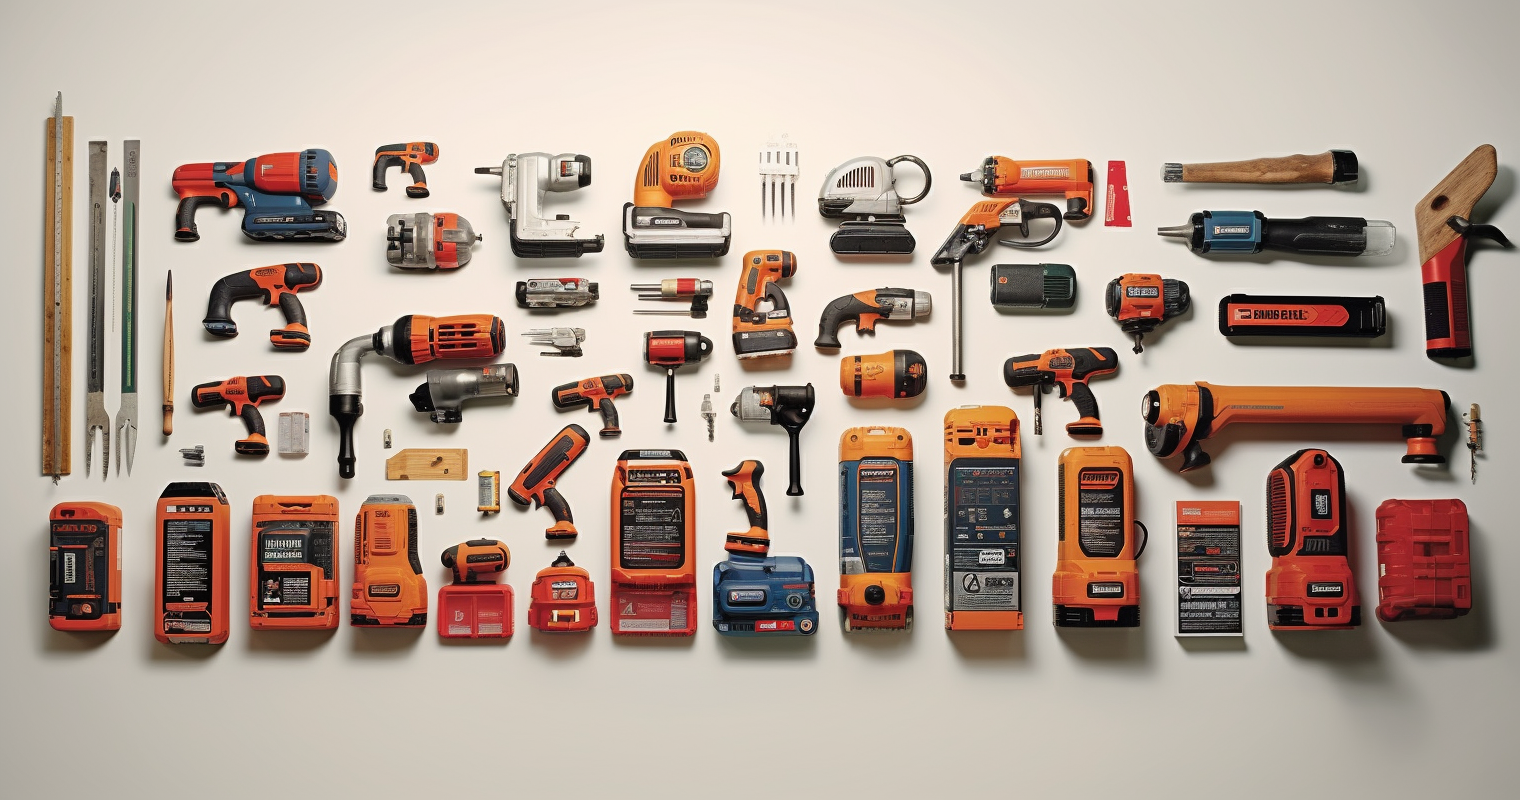 Comparison Of Tool Shop Power Tools With Competitors